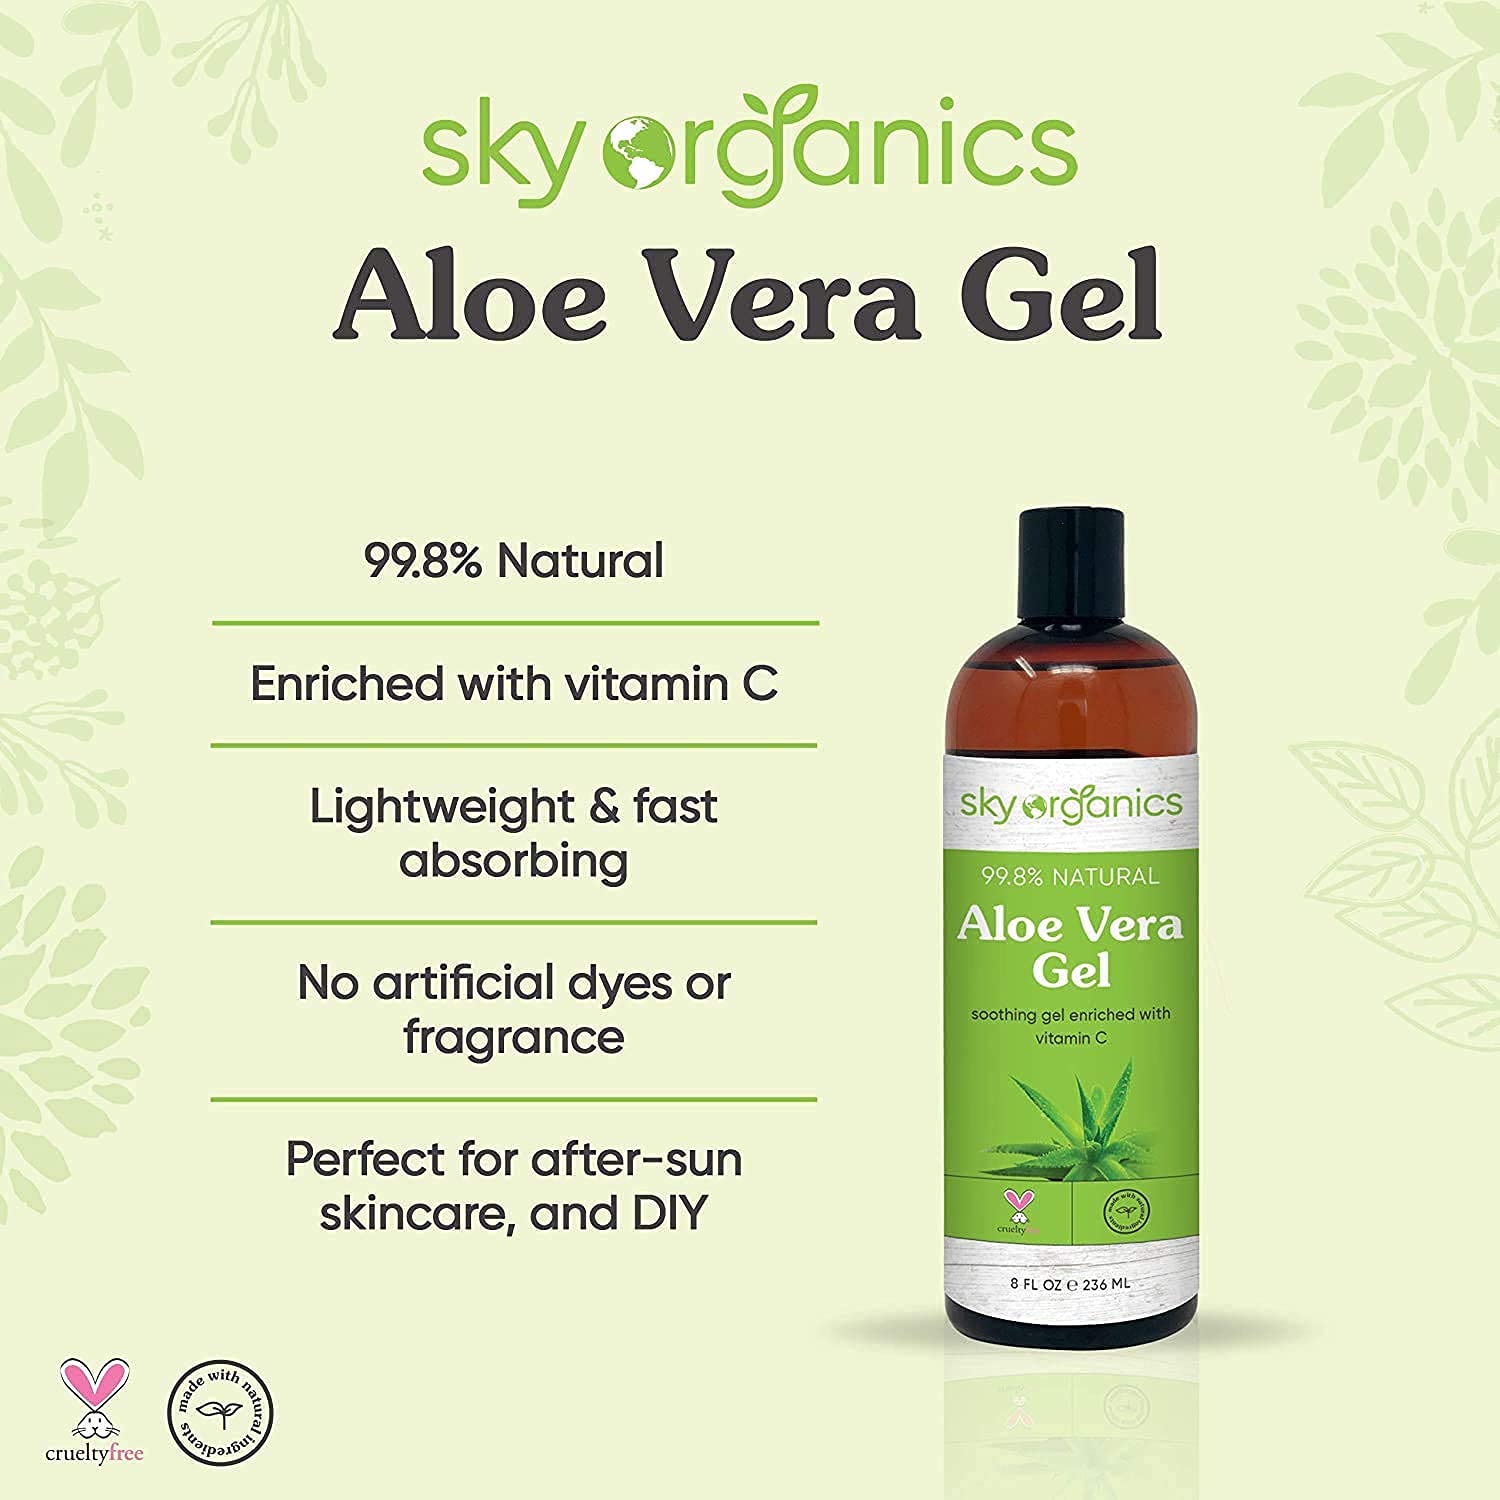 Aloe Vera Gel (8oz x 3 Pack) All Natural Ultra Hydrating Skin Cooling Aloe Gel, Non-Sticky Relief of Sunburns, Razor Burns, Bug Bites- Hair Conditioner & Gel- Cold Pressed, Made in USA